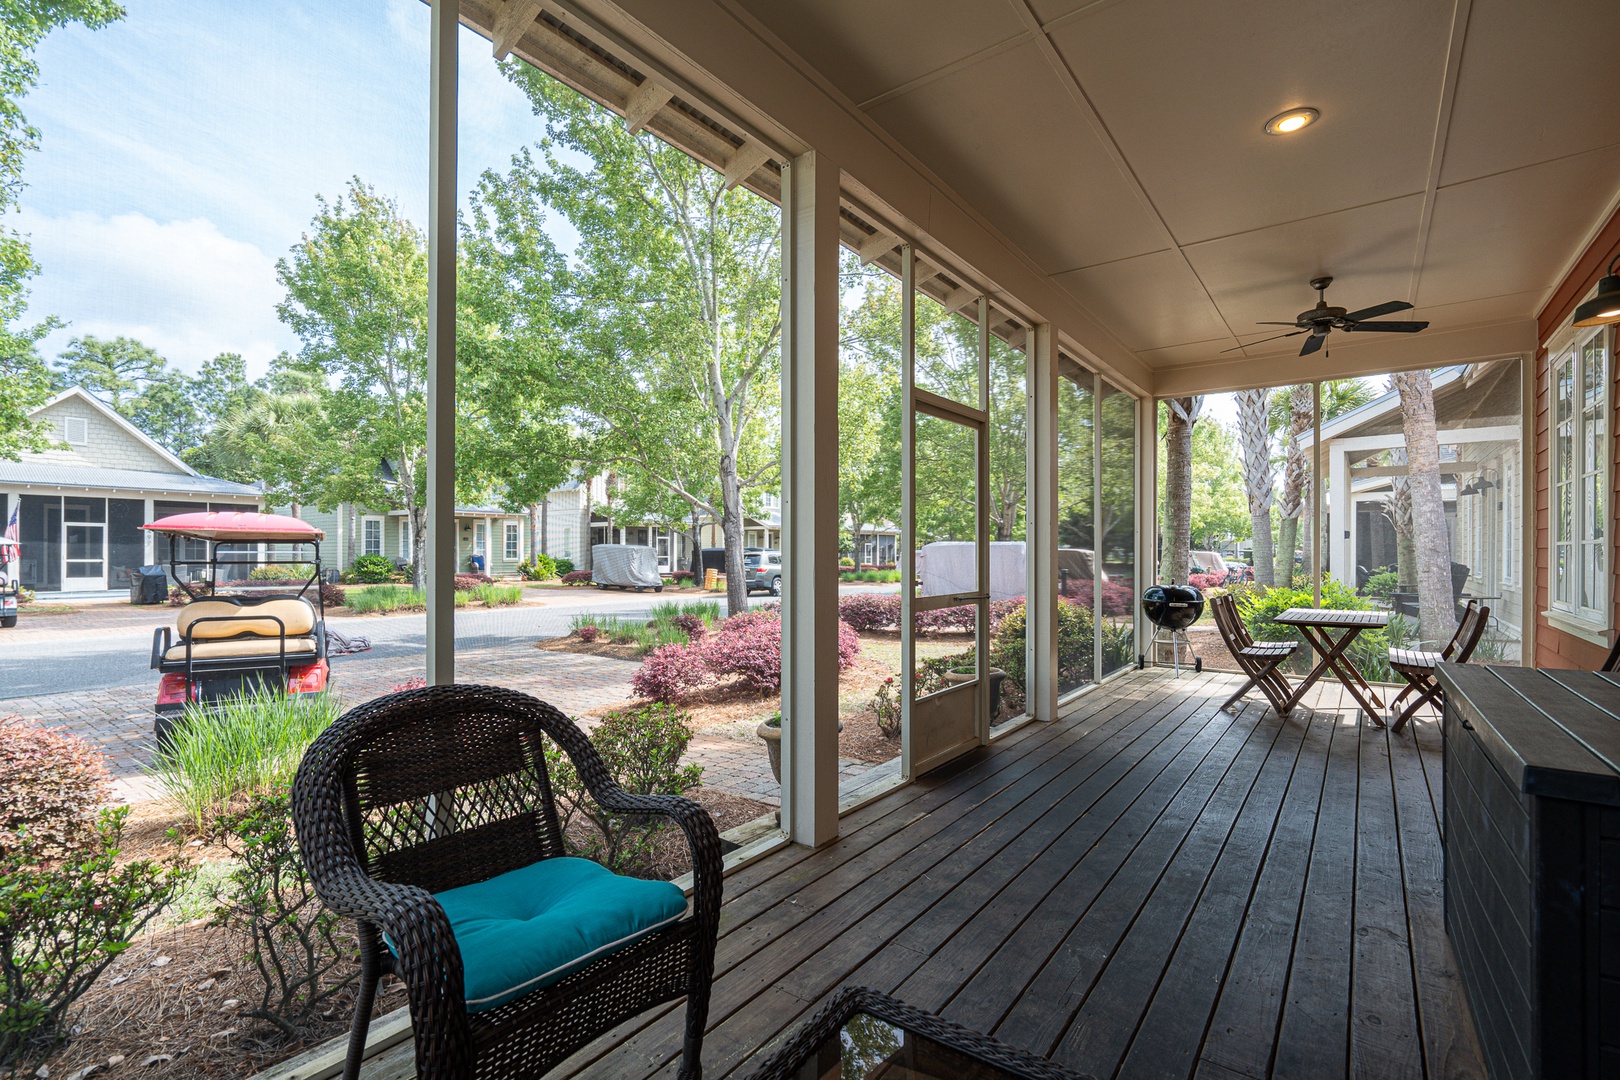 Screened porch with seating and grill